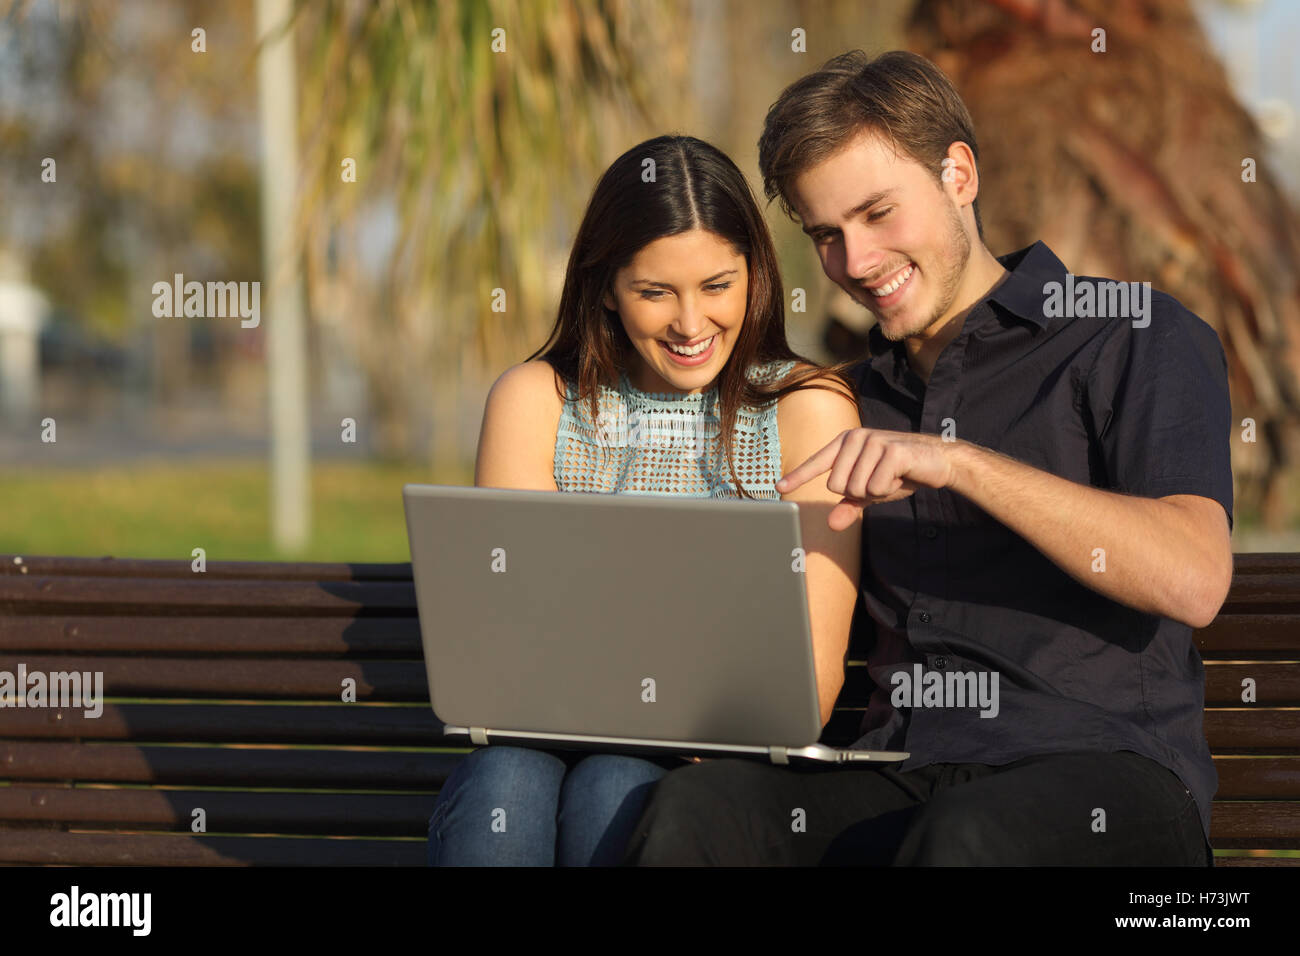 Couple watching media in a laptop sitting on a bench Stock Photo